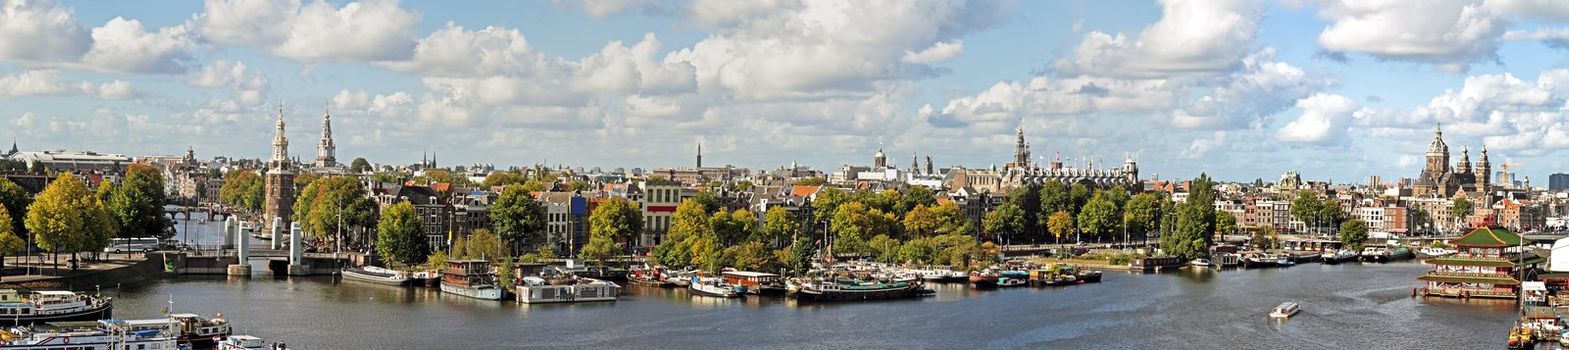 Panorama from the city Amsterdam in the Netherlands